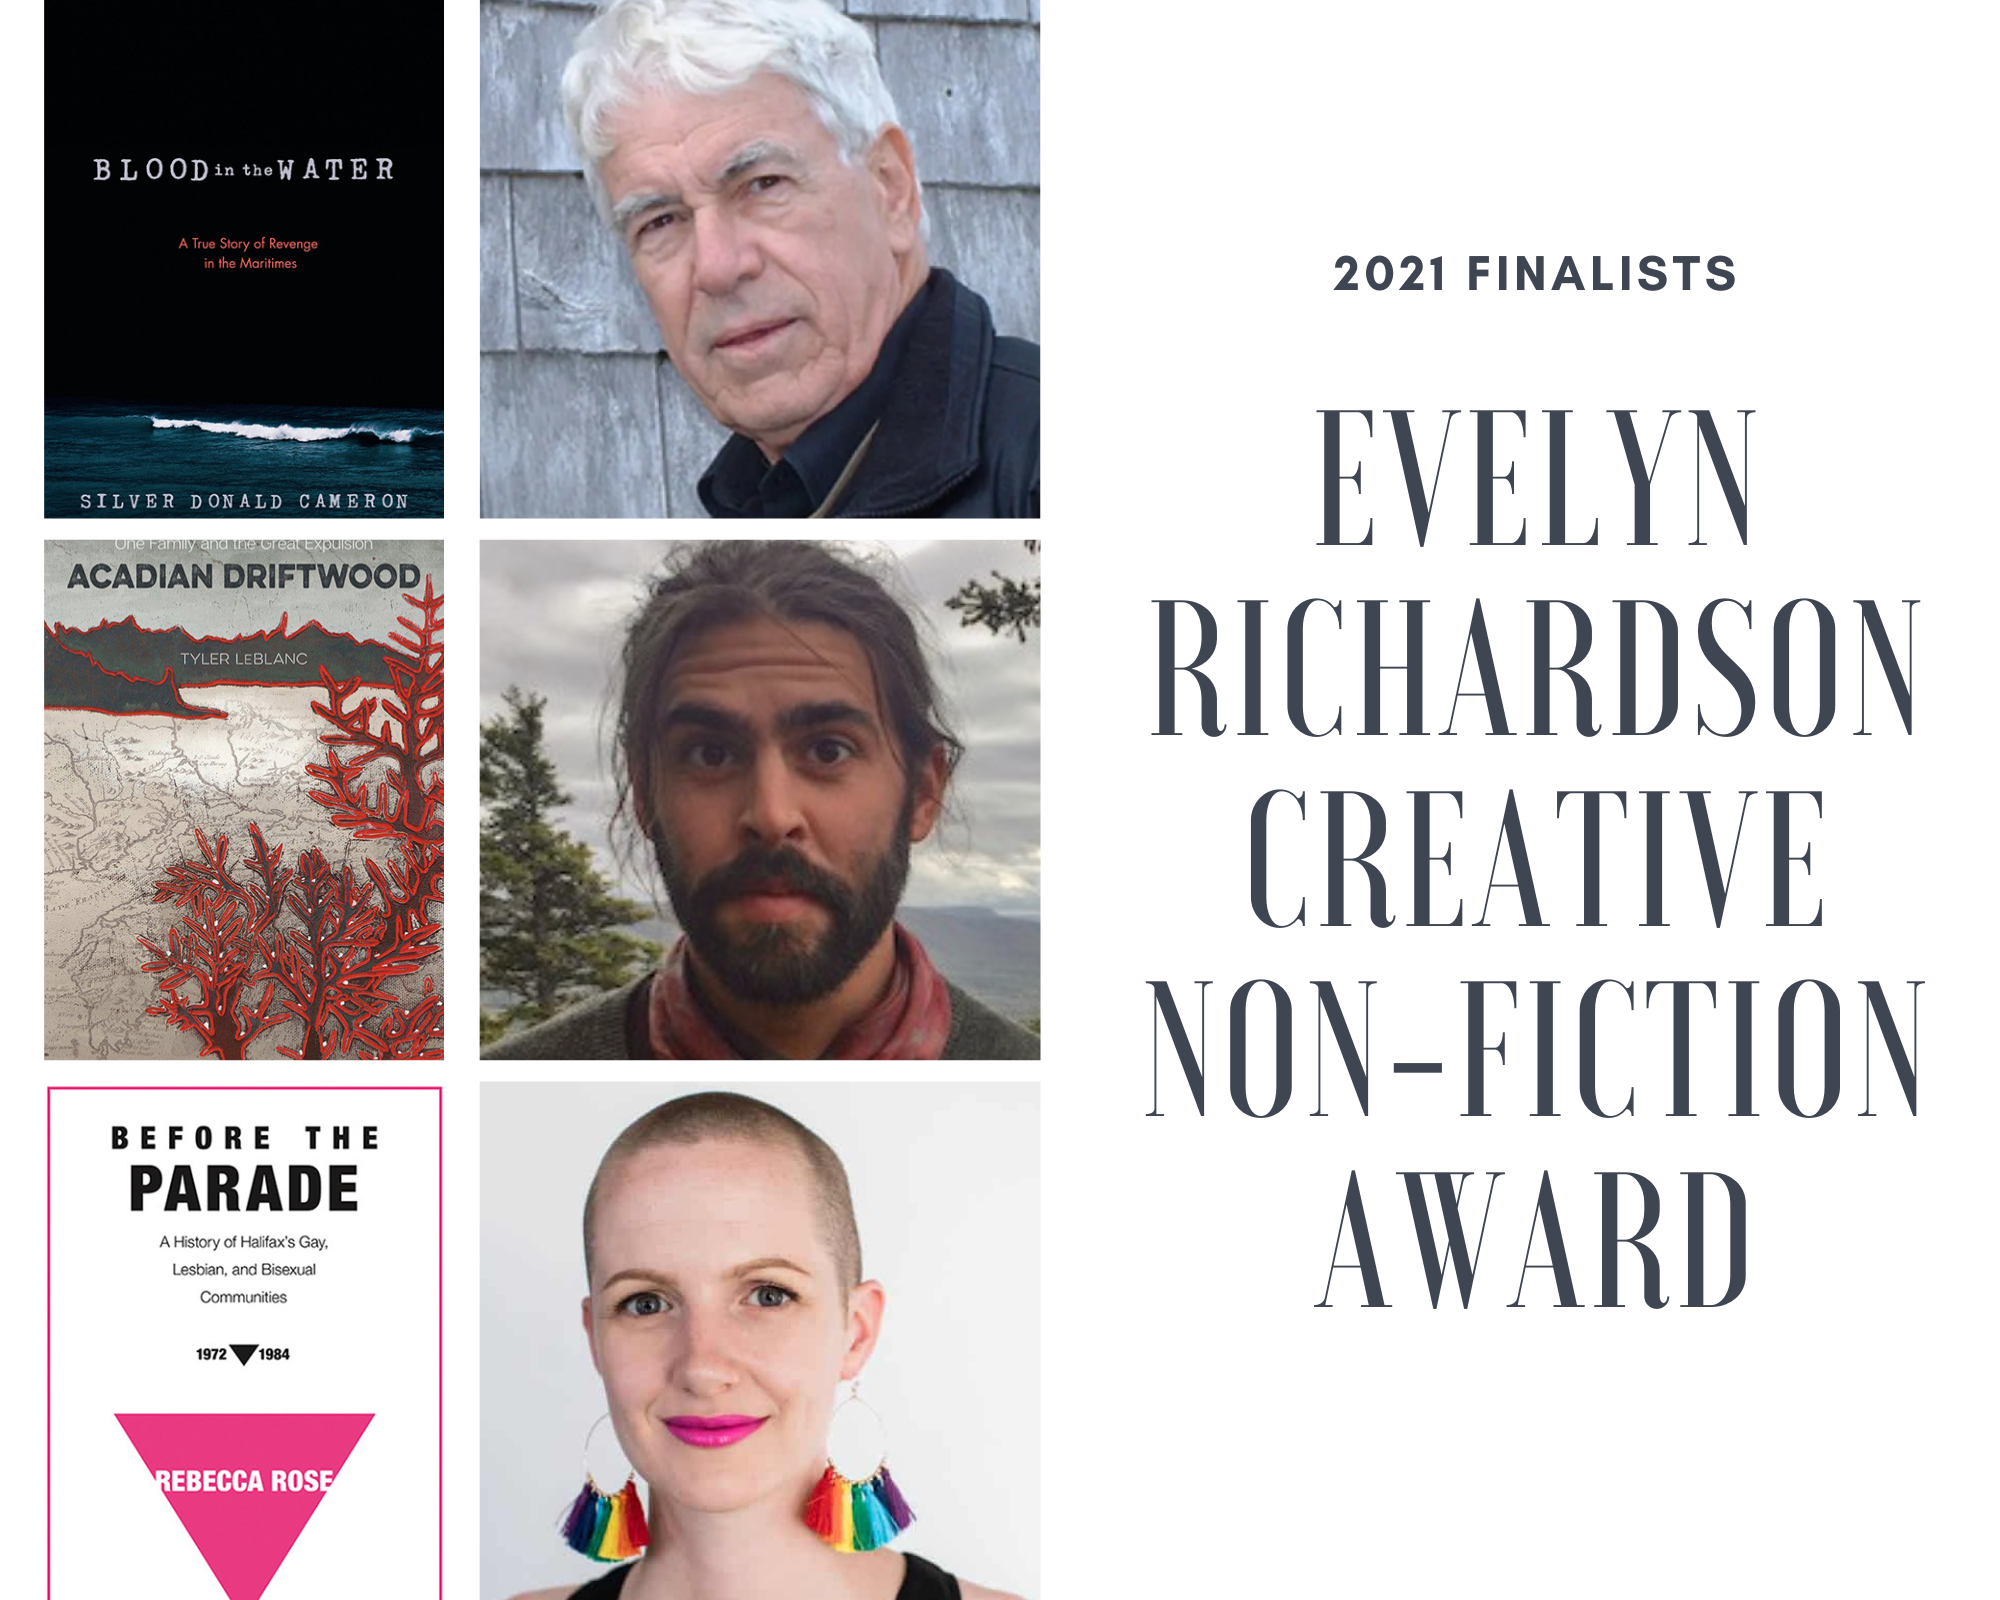 The Evelyn Richardson 2021 Shortlists celebrate under-told stories of Atlantic history